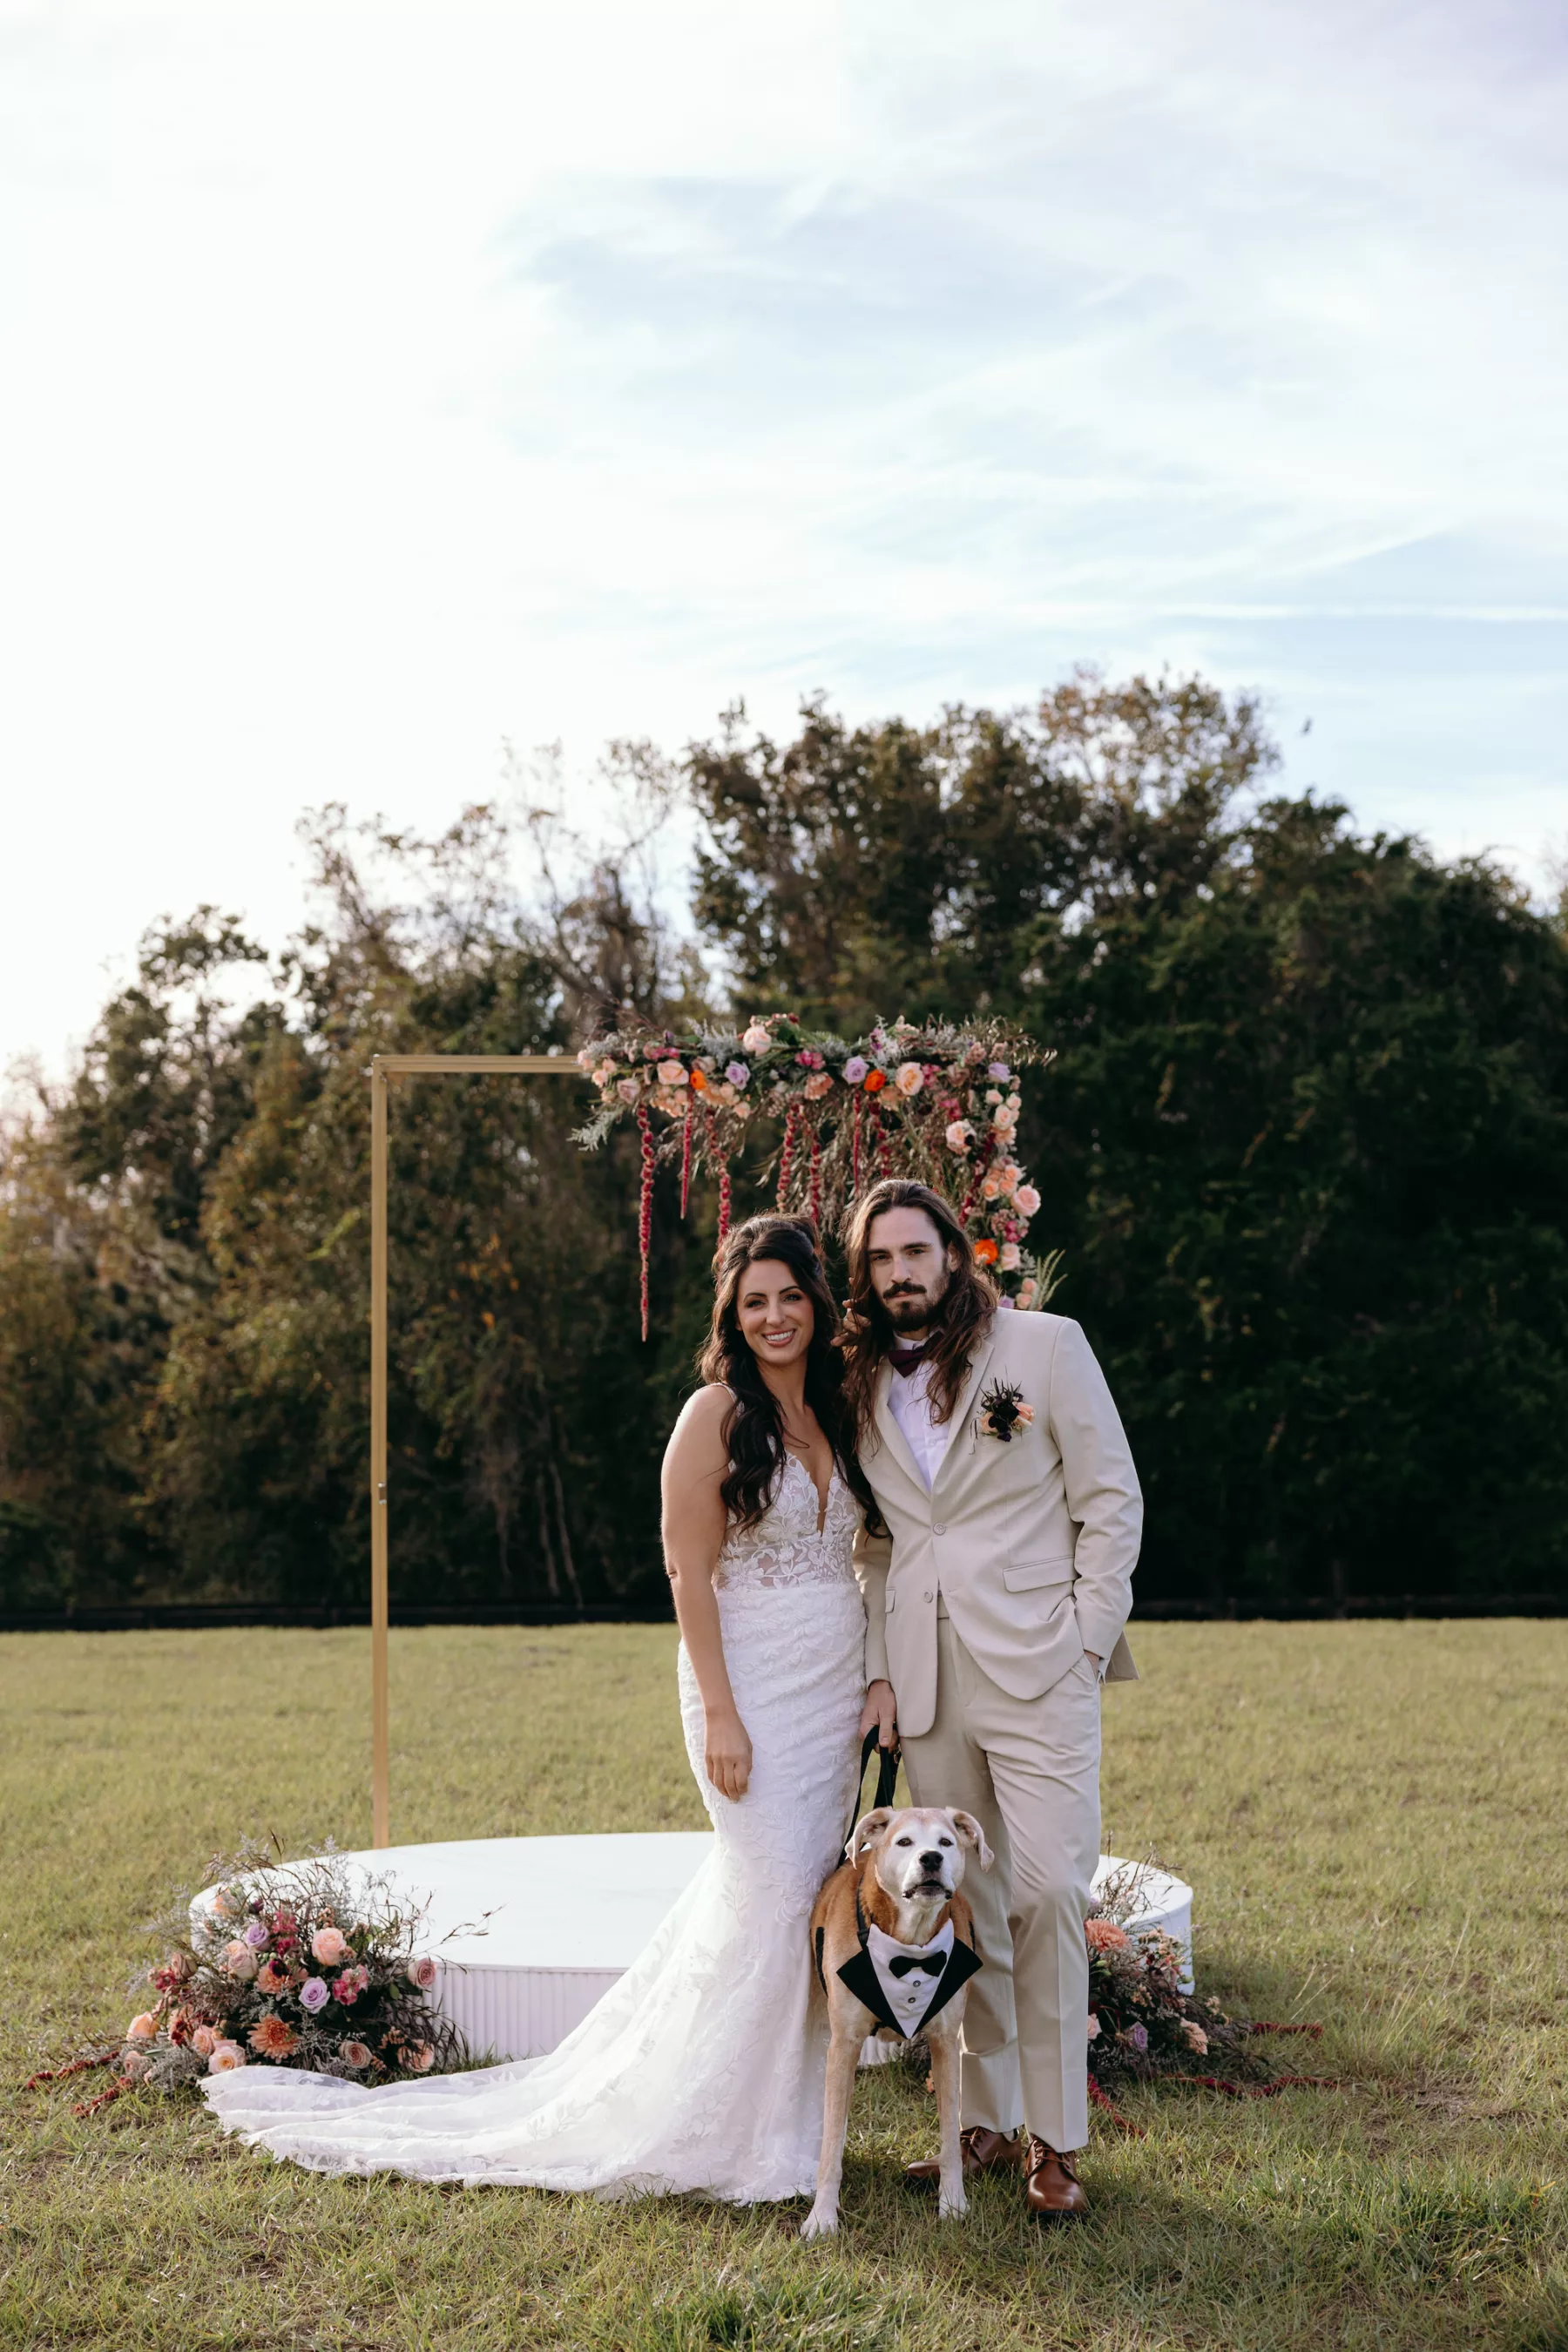 Bride and Groom with Dog Wedding Portrait | Tampa Bay Fairy Tail Pet Care